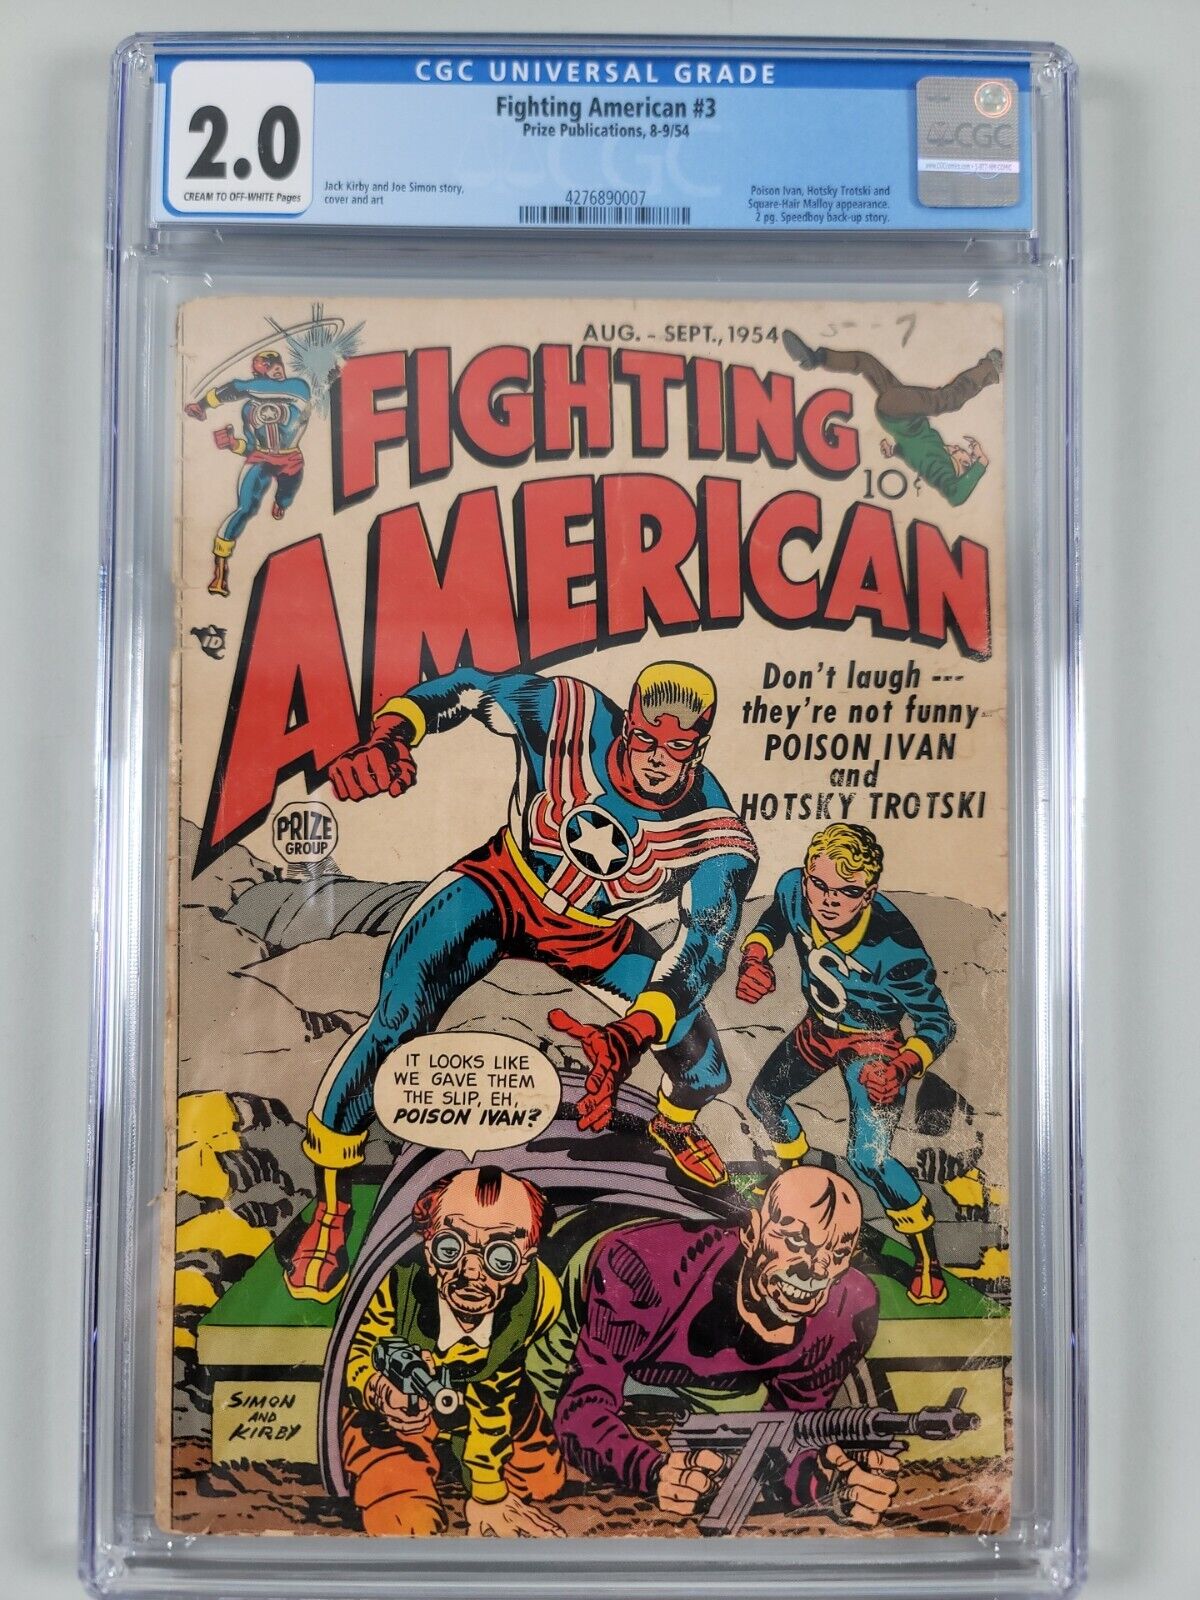 Prize Publications Fighting American #3 CGC 2.0 Golden Age Comic Jack Kirby